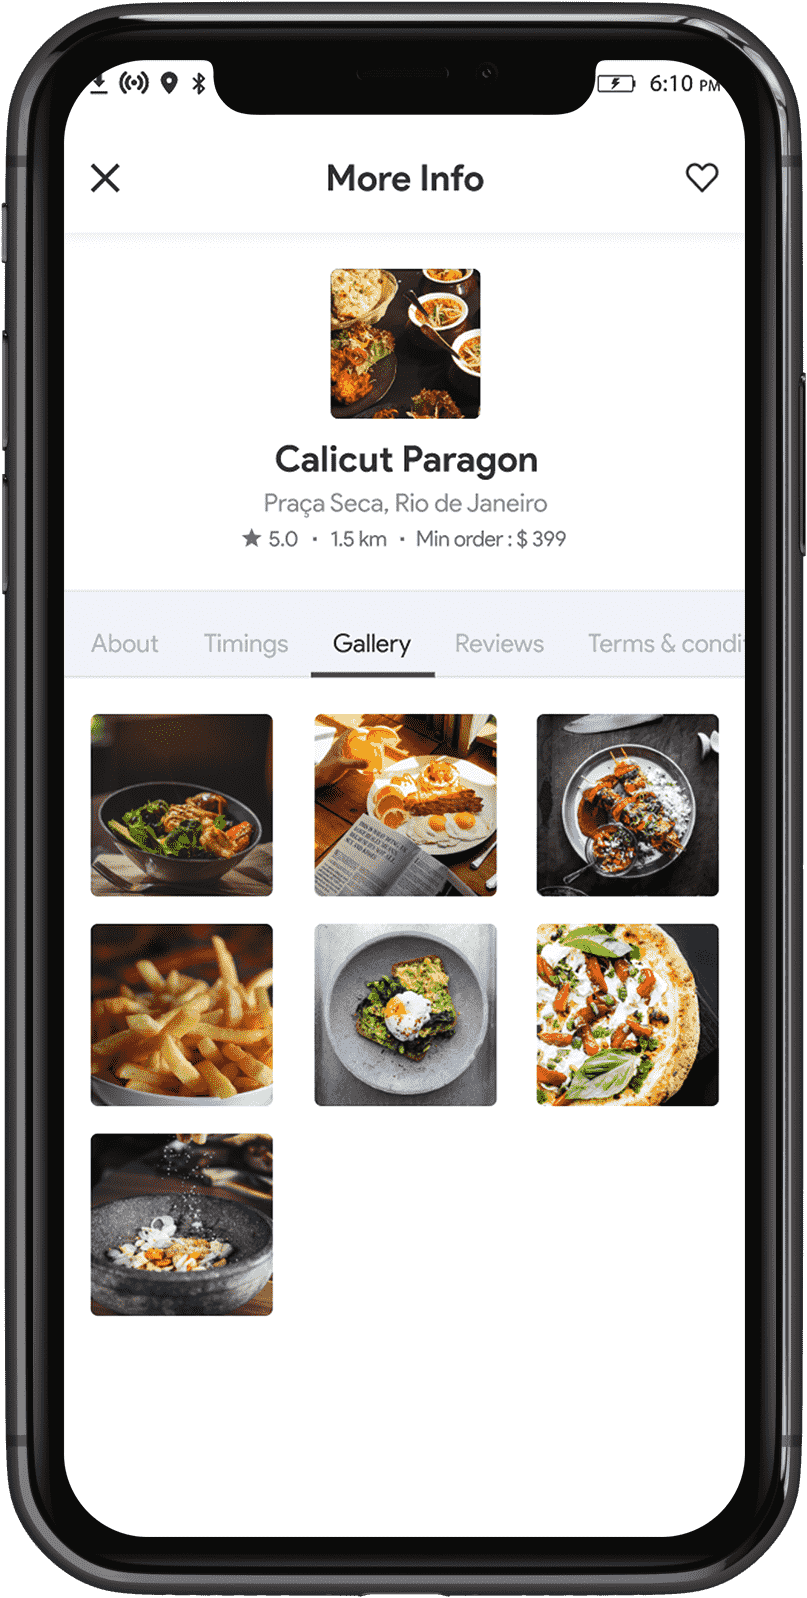 resturant-gallery-section-in-food-delivery-customer-app.png